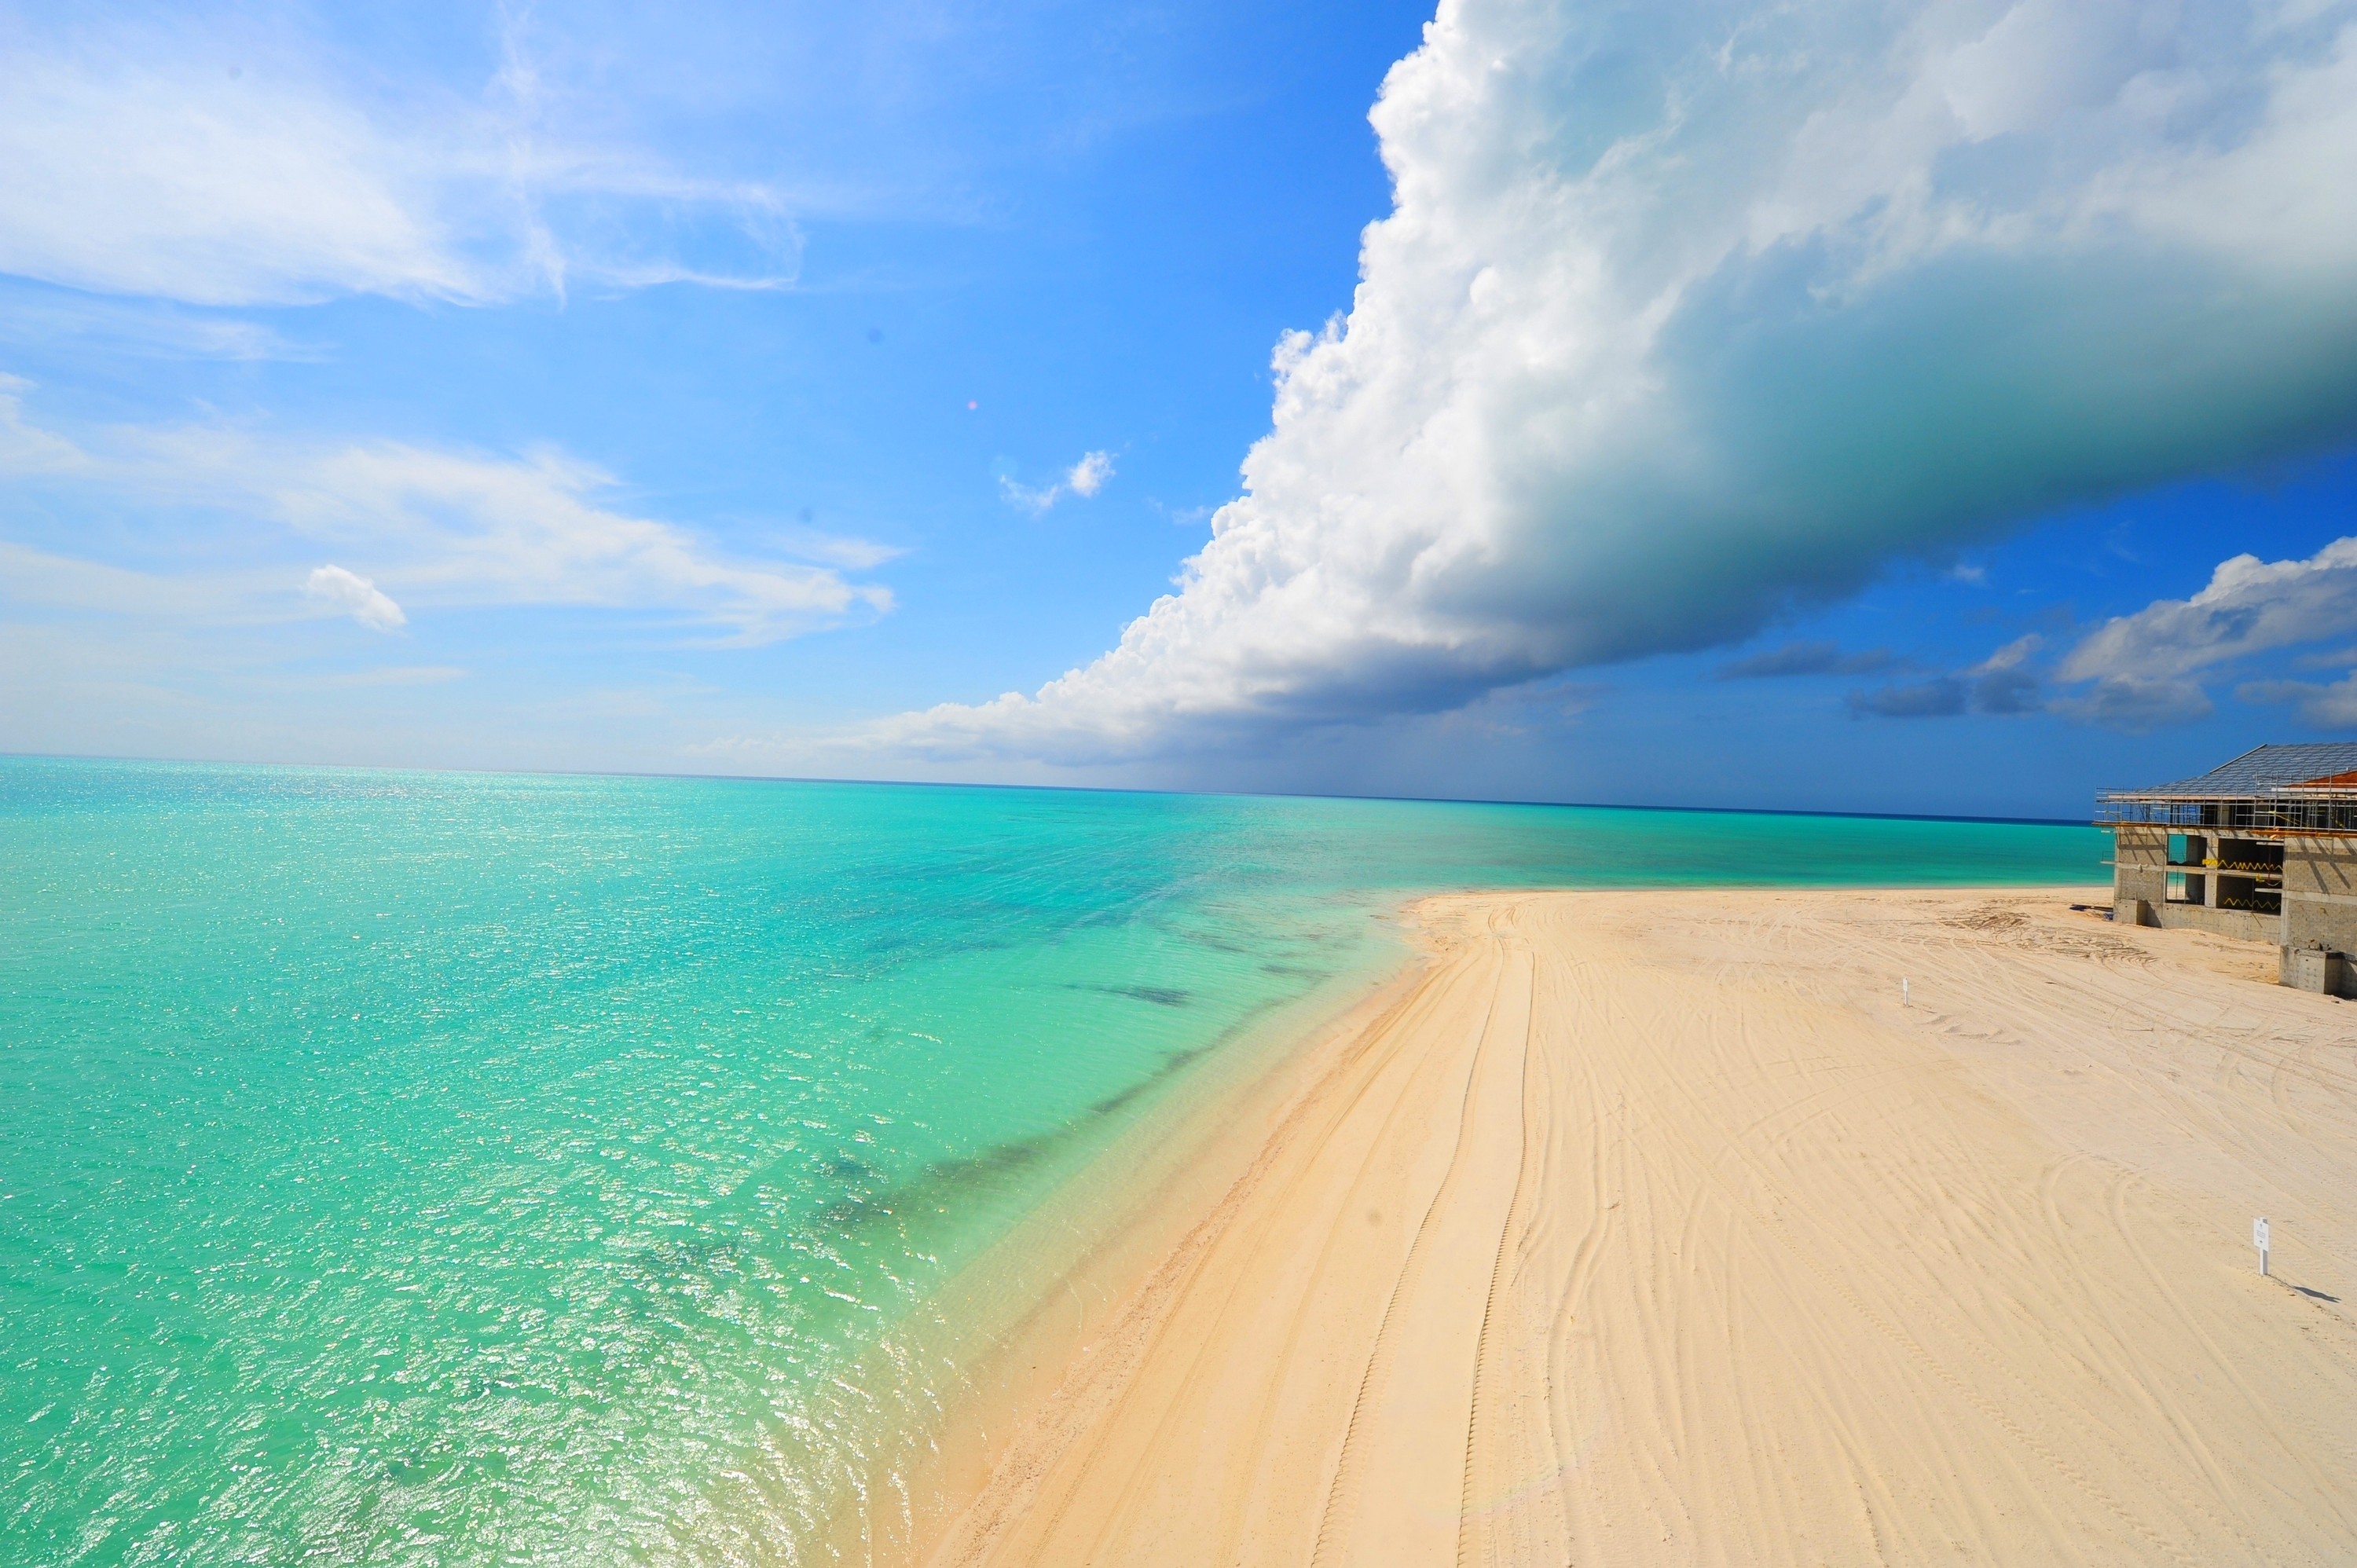 General 3000x1996 beach summer sea sand tropical clouds turquoise Caribbean vacation island nature landscape